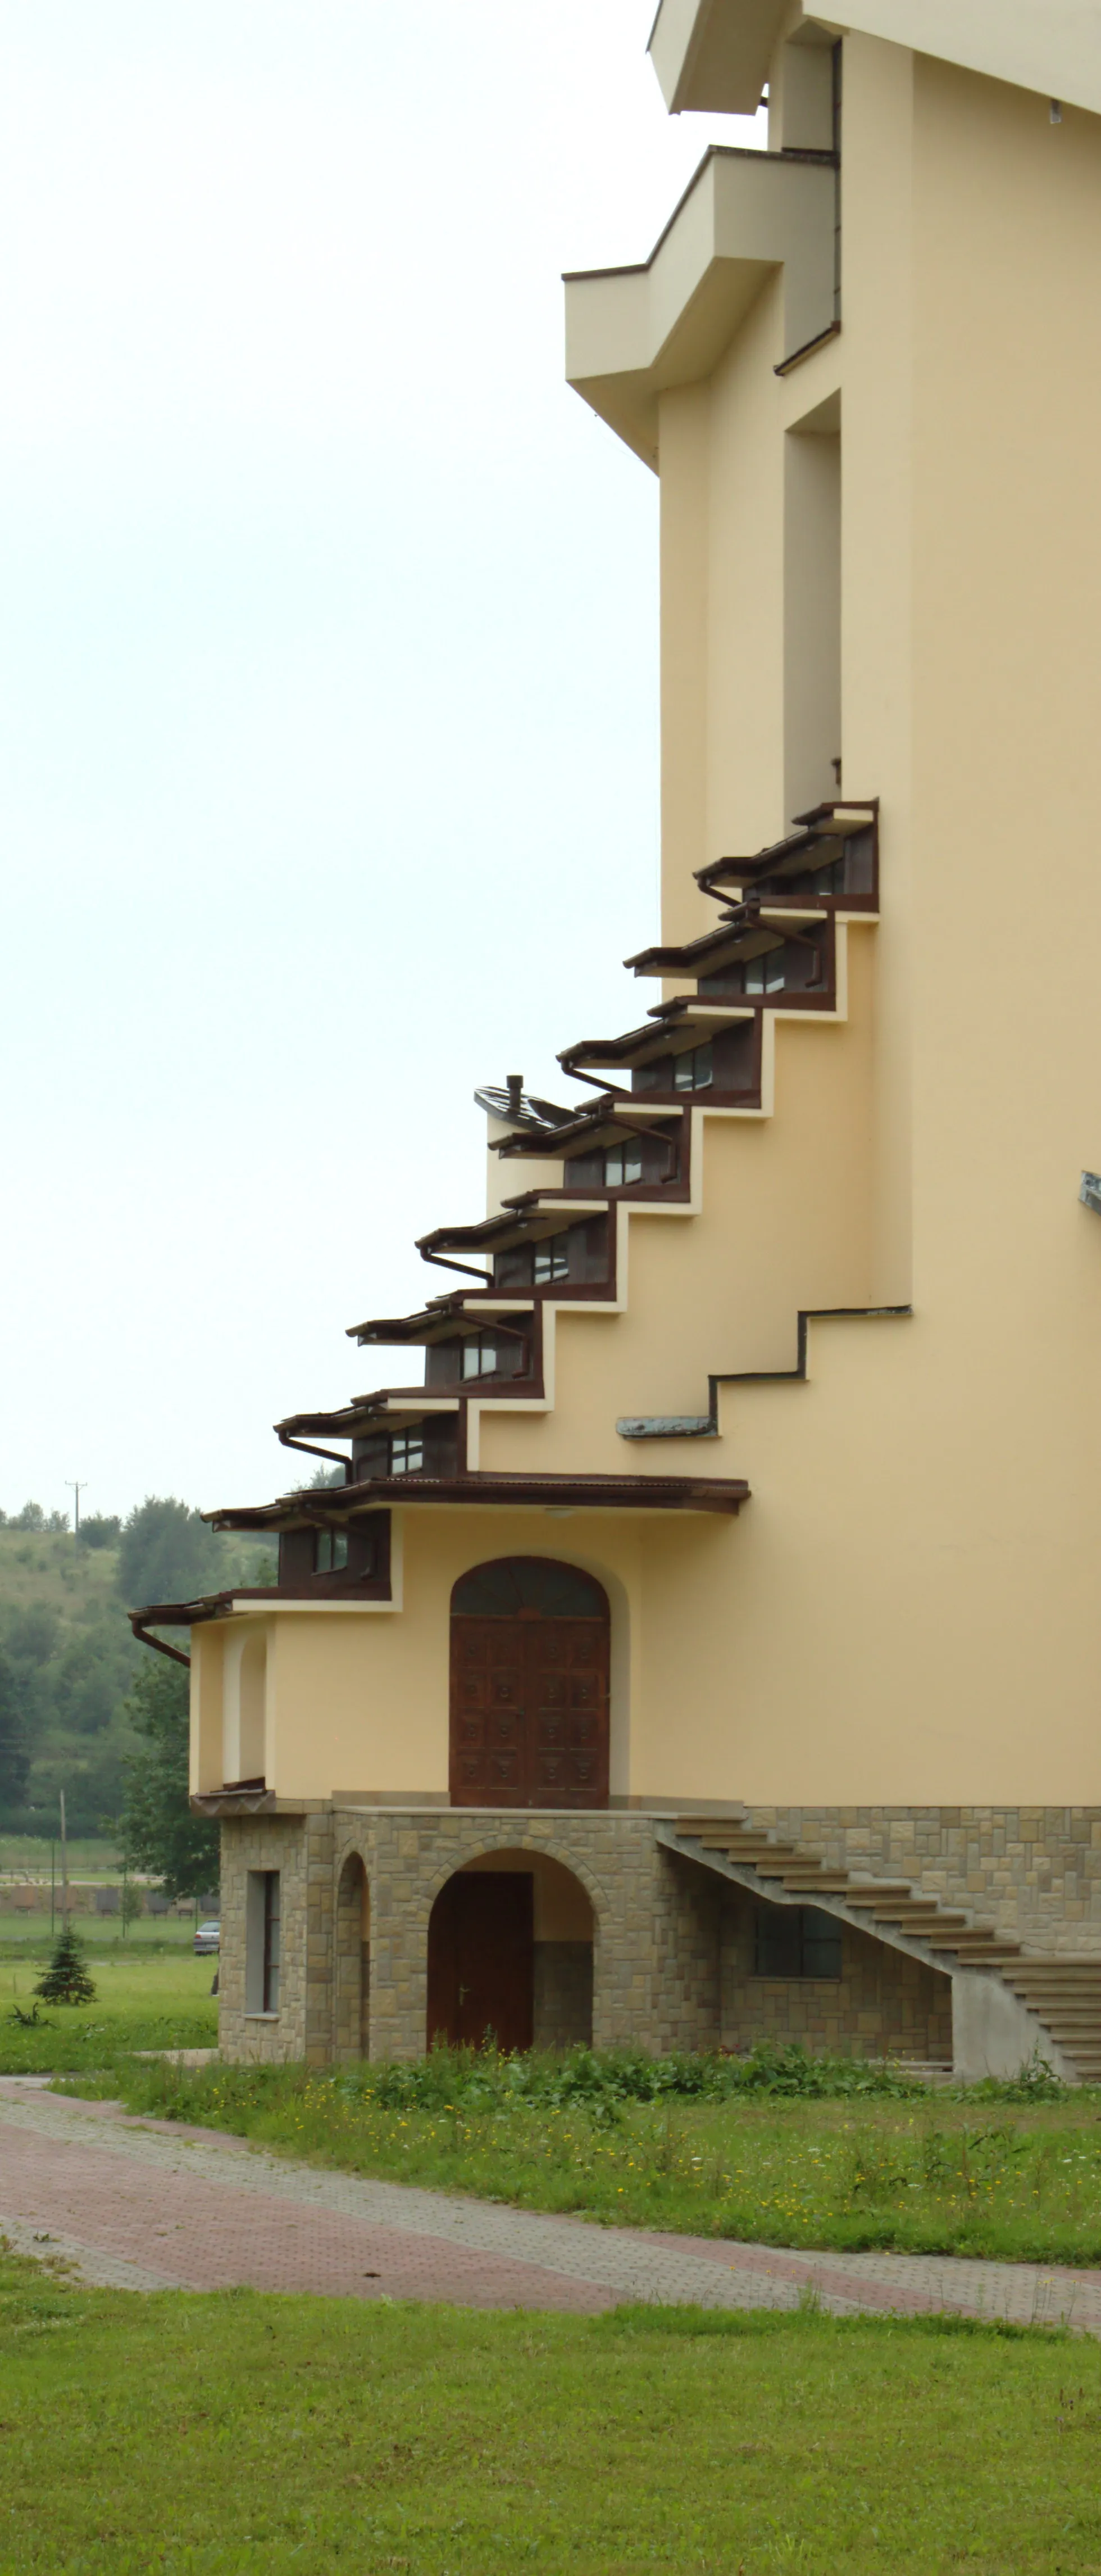 Photo showing: Closeup view of one of the facades of the modern church in Domaradz, Podkarpackie voivodeship, Poland